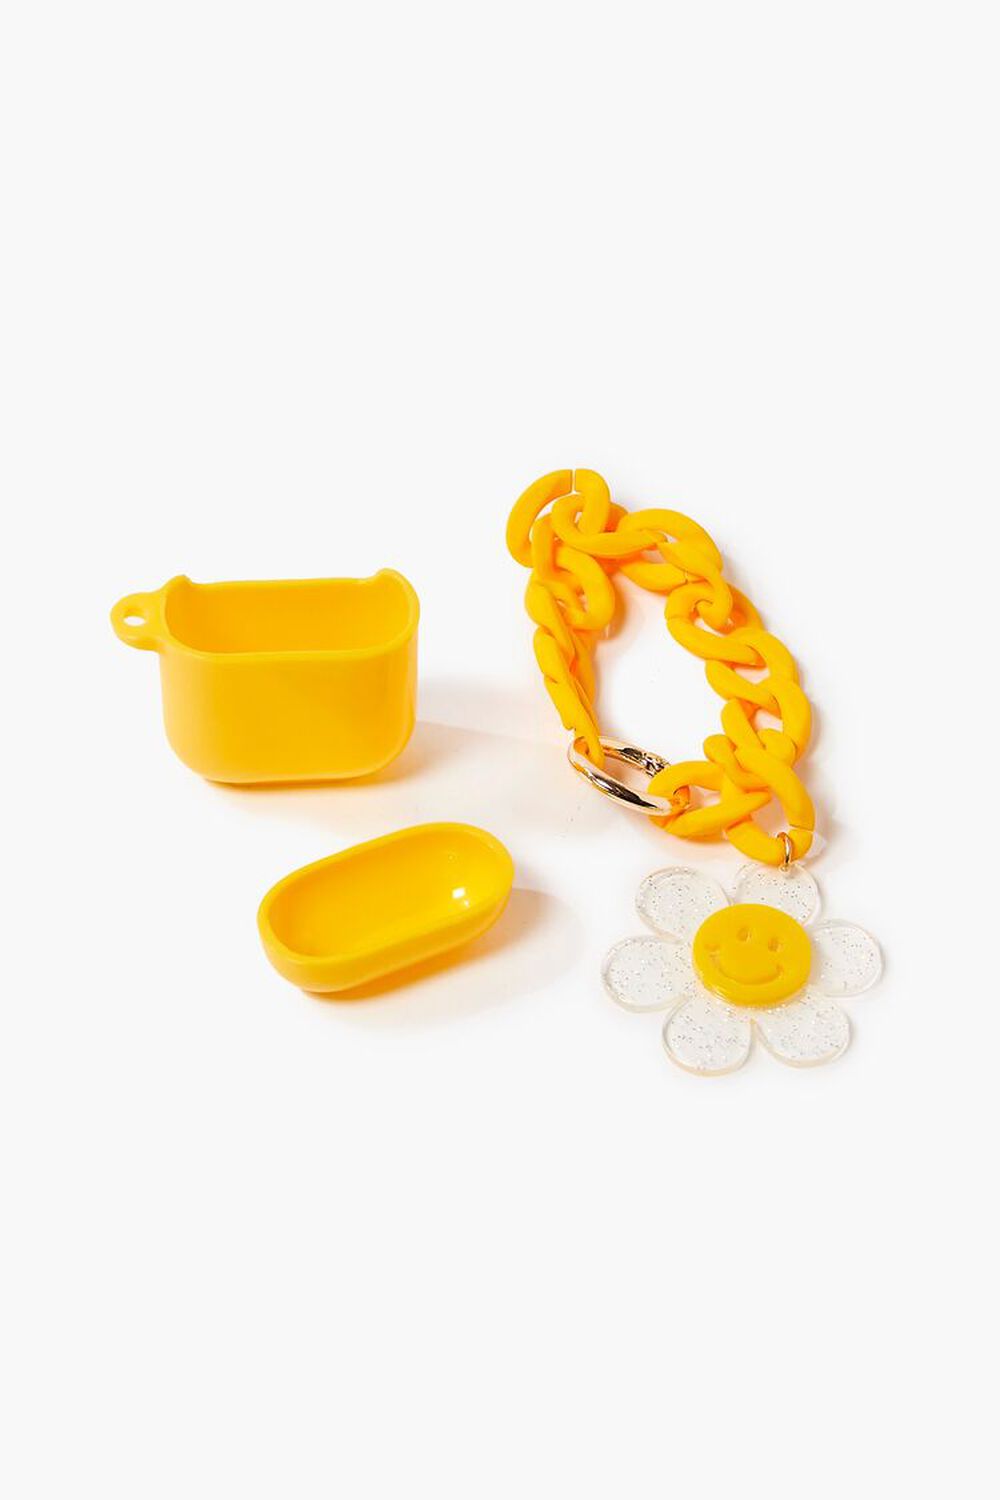 YELLOW Happy Face Wireless Earbuds Case, image 1